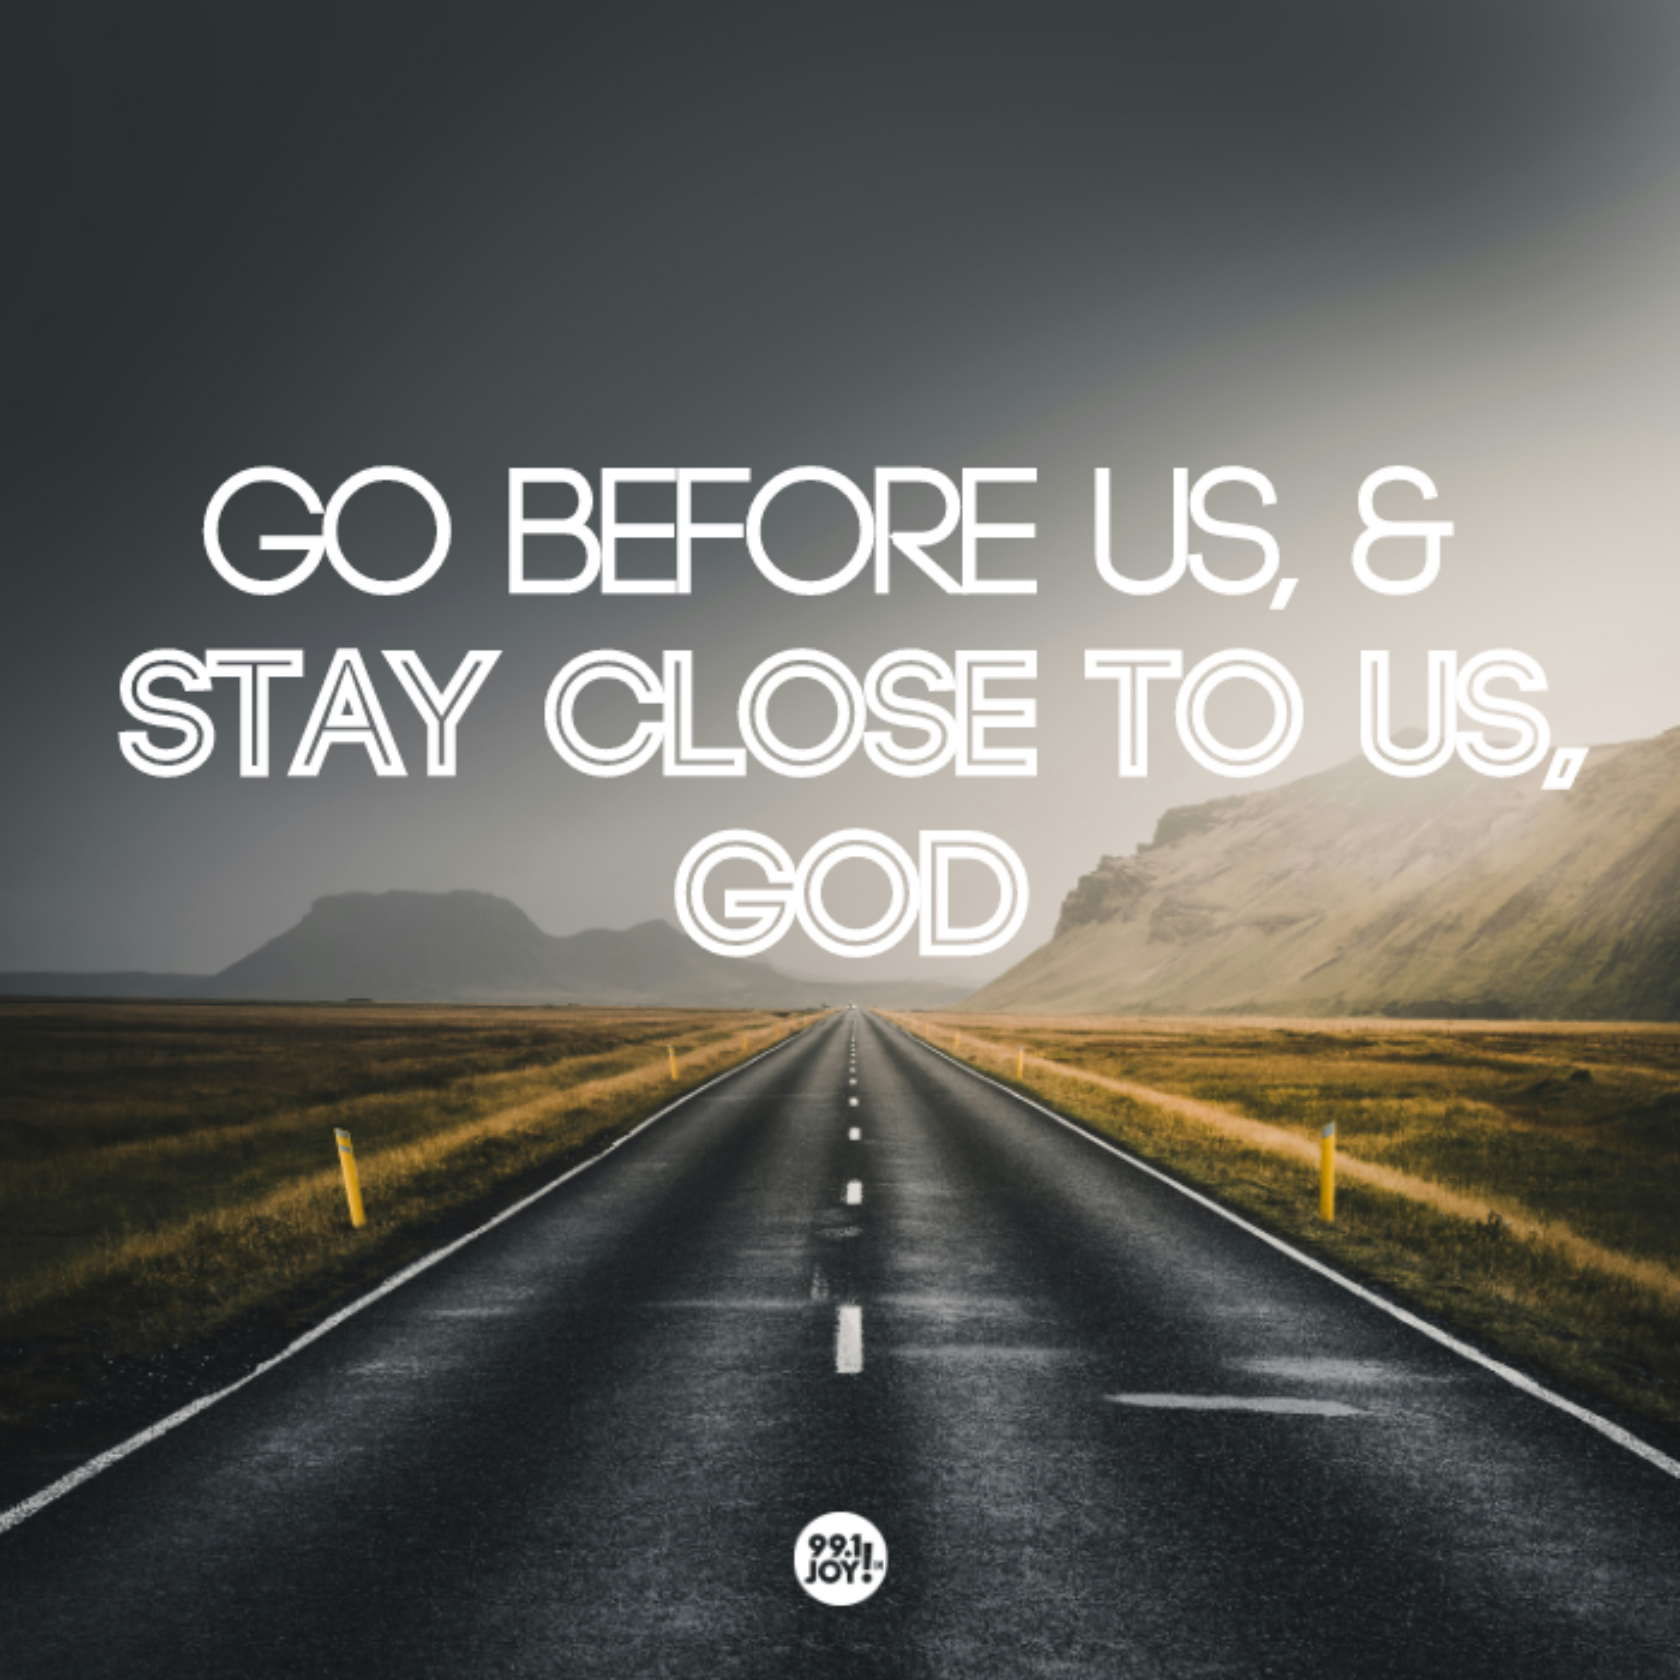 Go Before Us, and Stay Close To Us, God.